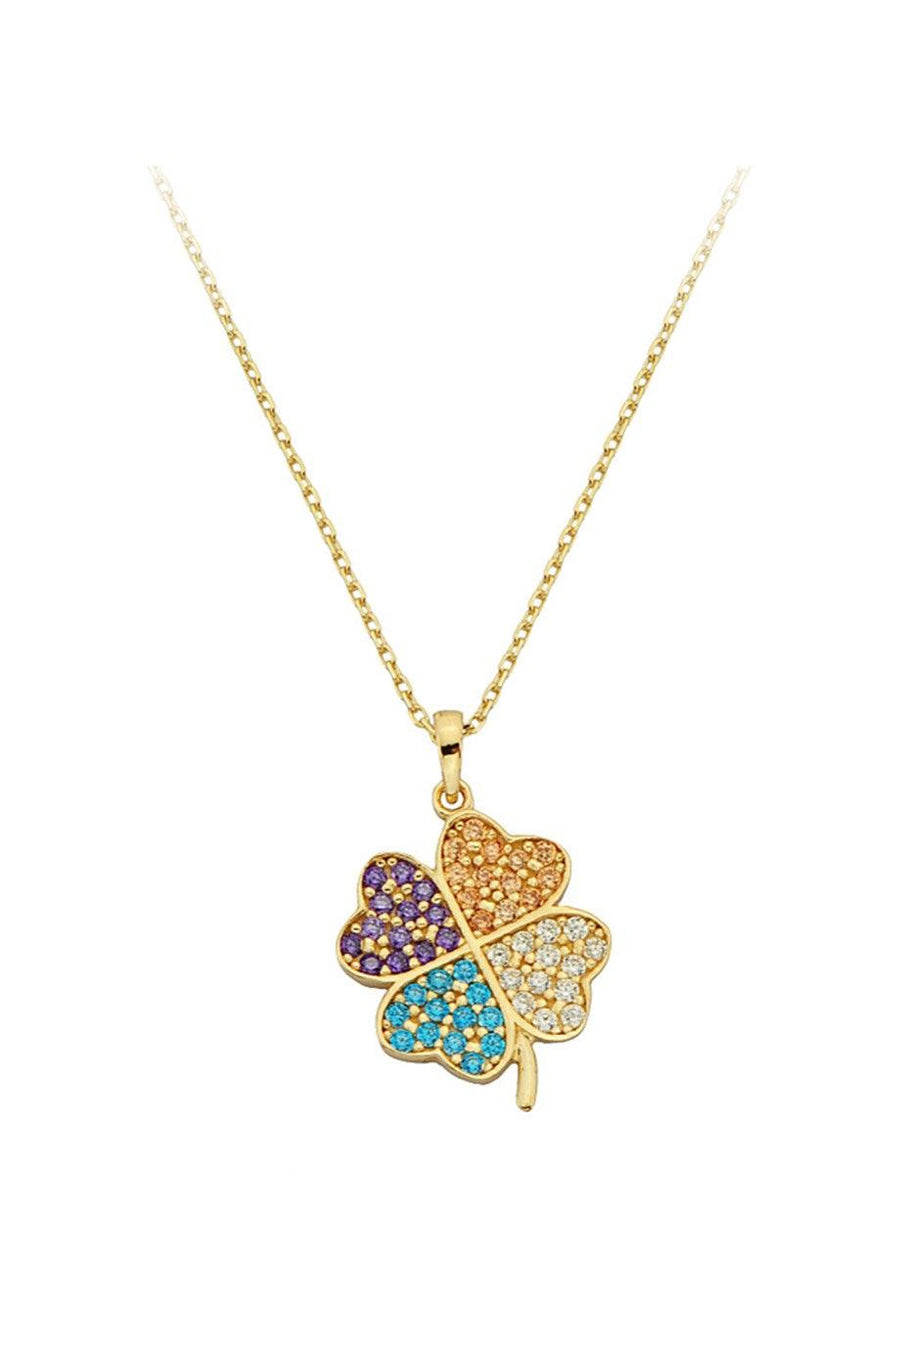 Golden -Colored Clover Necklace